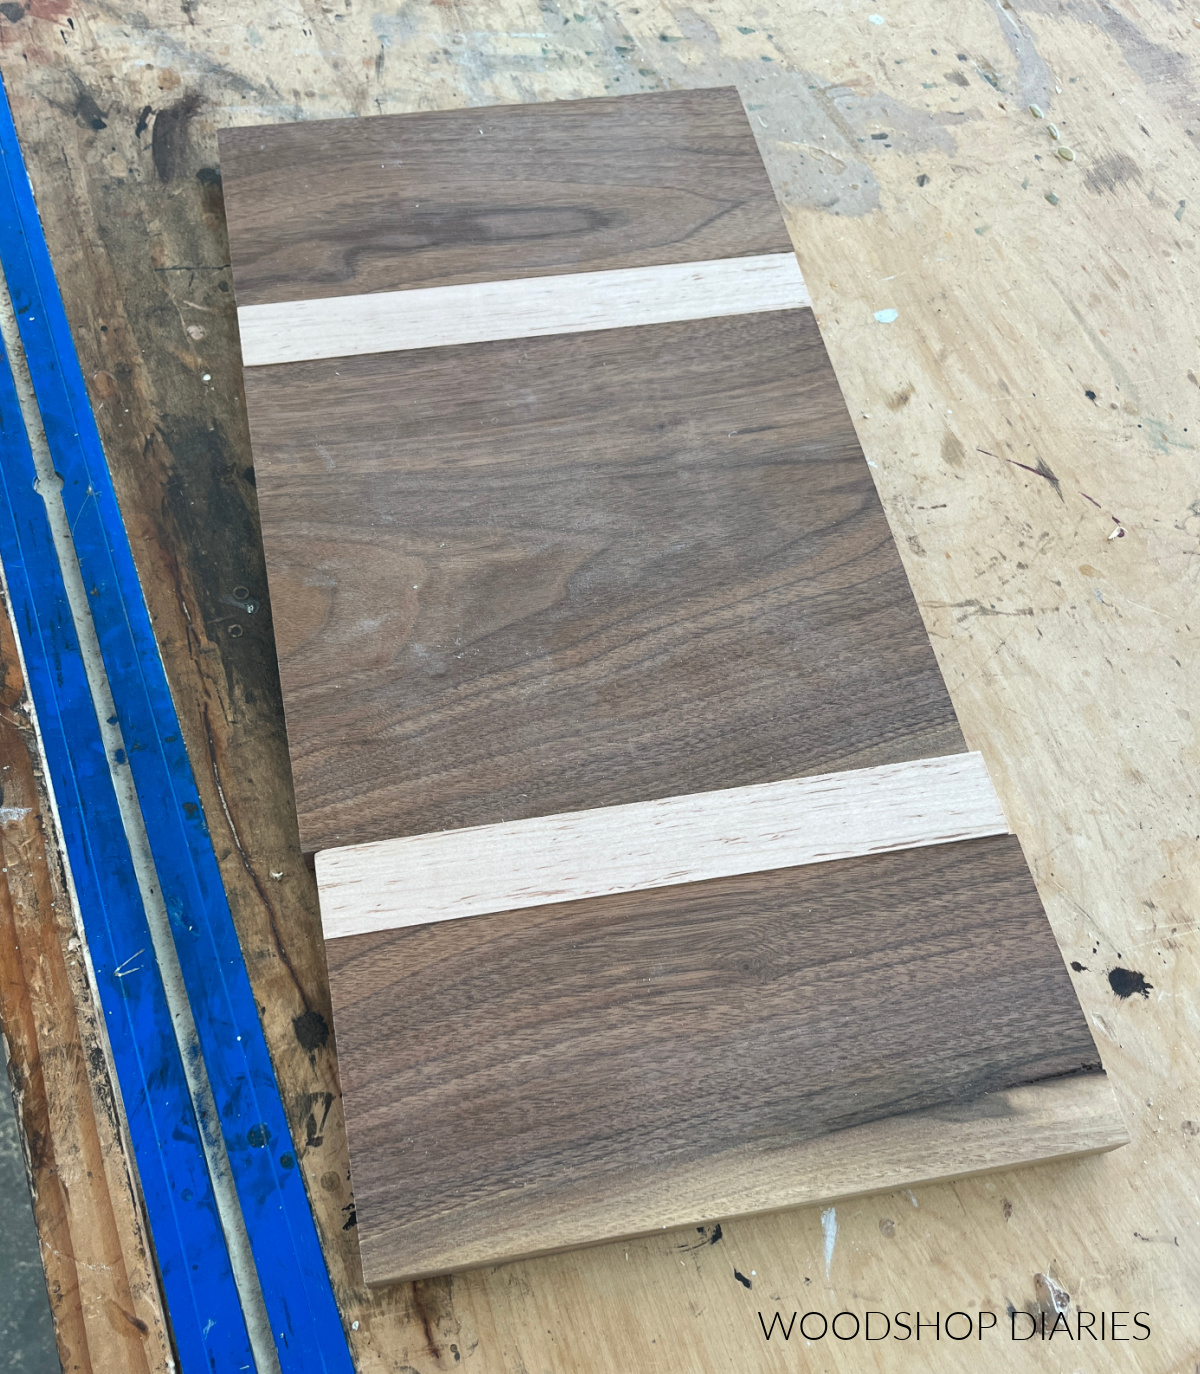 DIY walnut and maple cutting board pieces dry fit and laid out on workbench